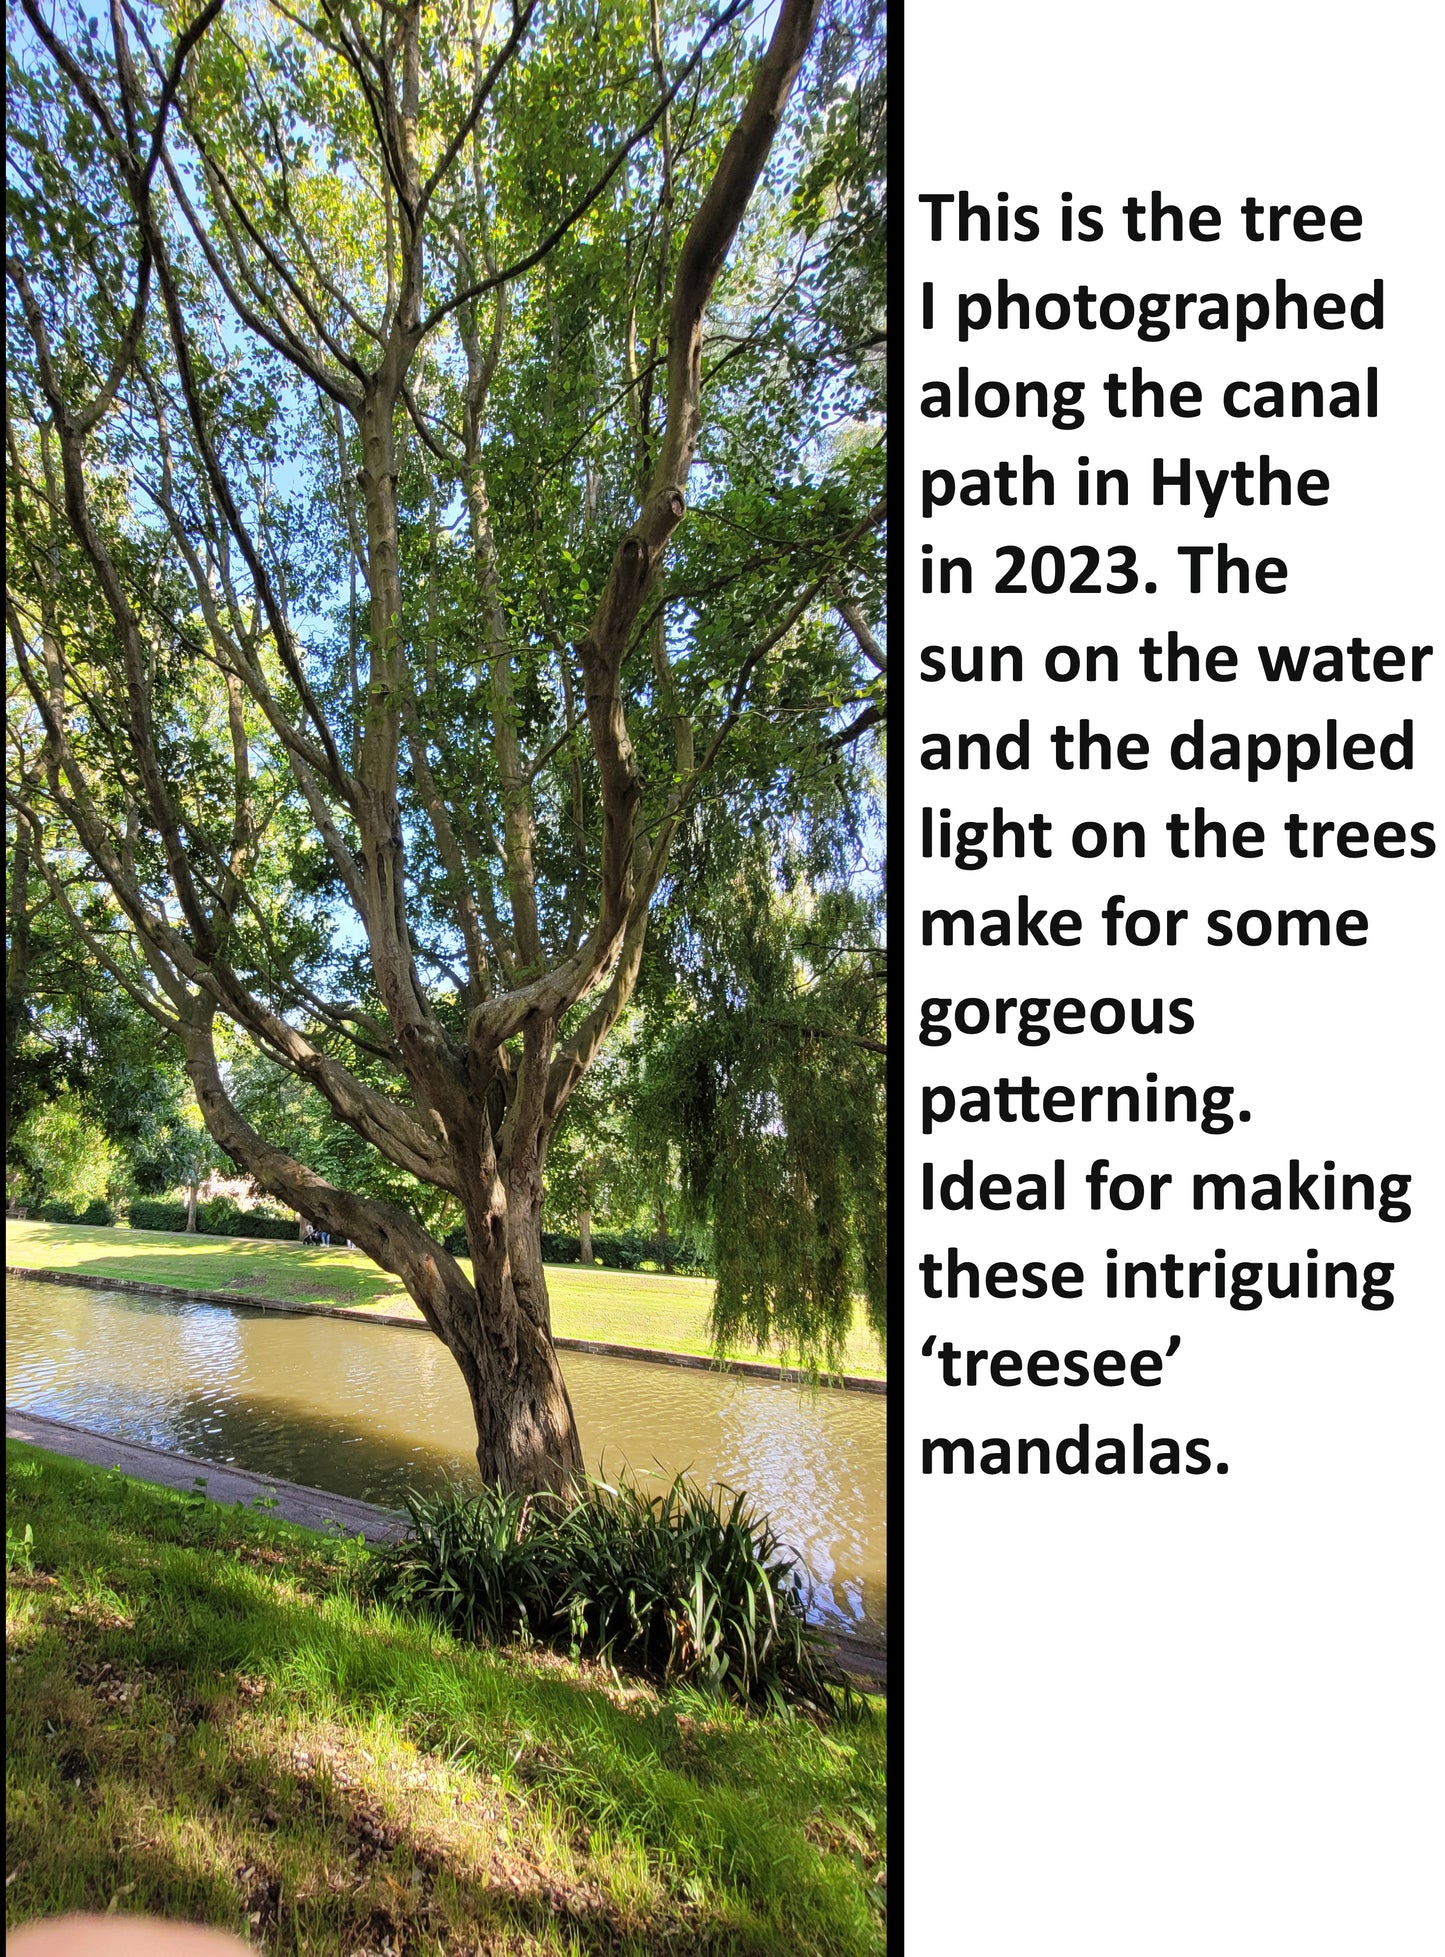 a photo of a tree next to a canal, both are covered in dappled sunlight. text next to the image describes how the scene inspired the creation of a mandala art print